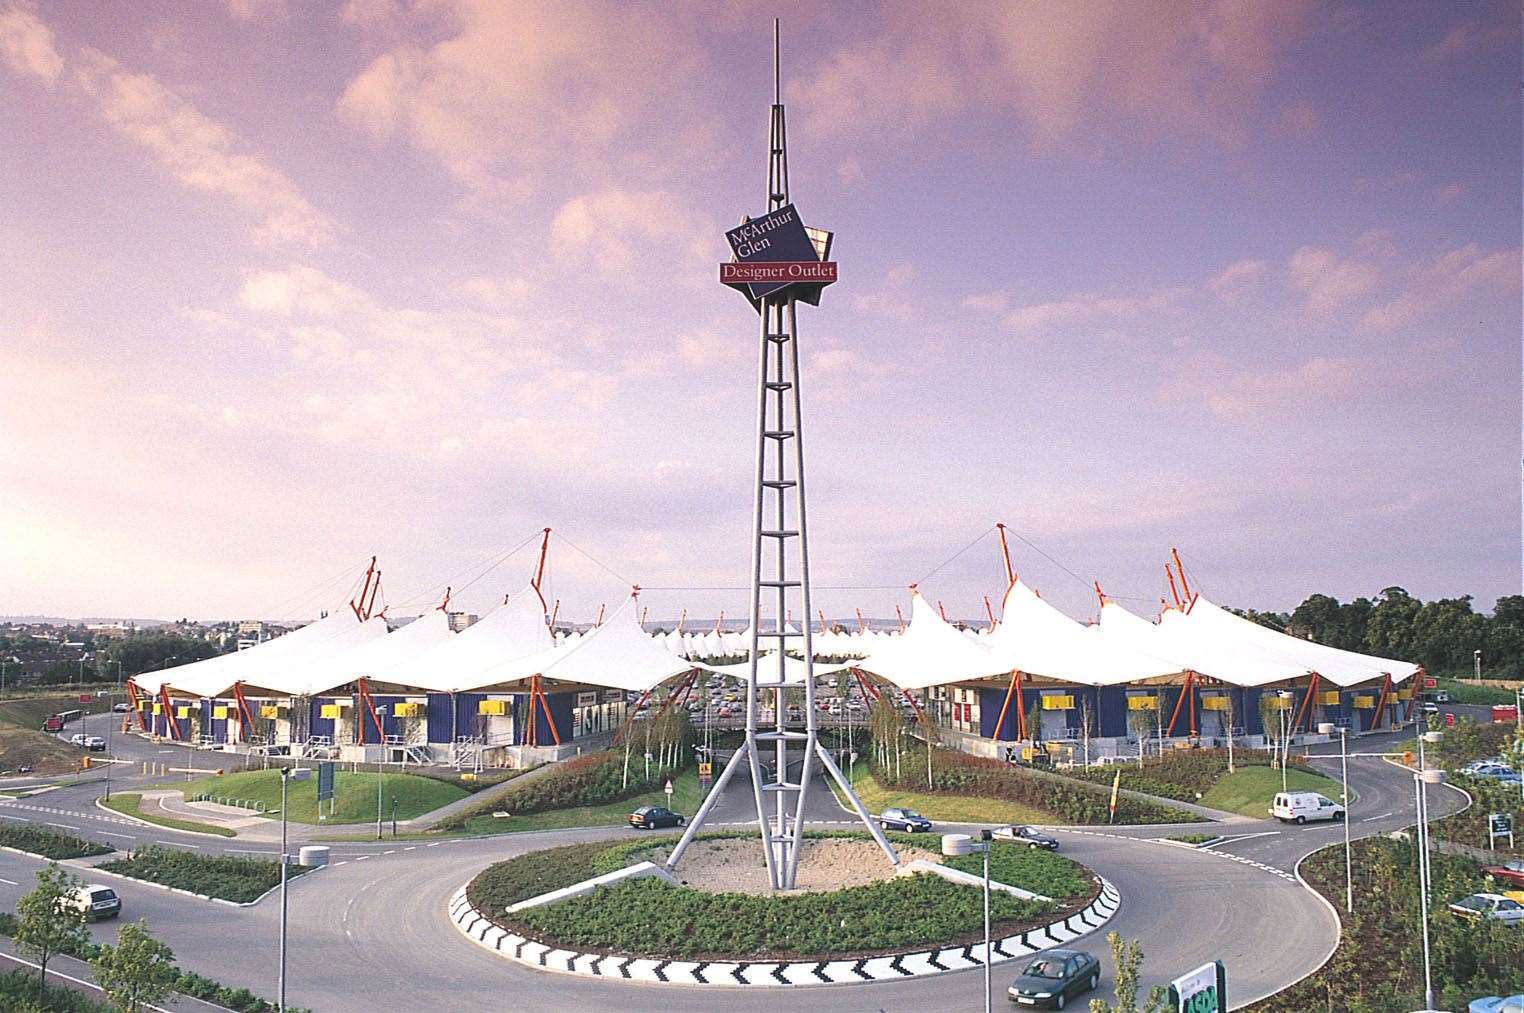 The Ashford Designer Outlet in March 2000 - just before it opened. Copyright: City Press Services Ltd